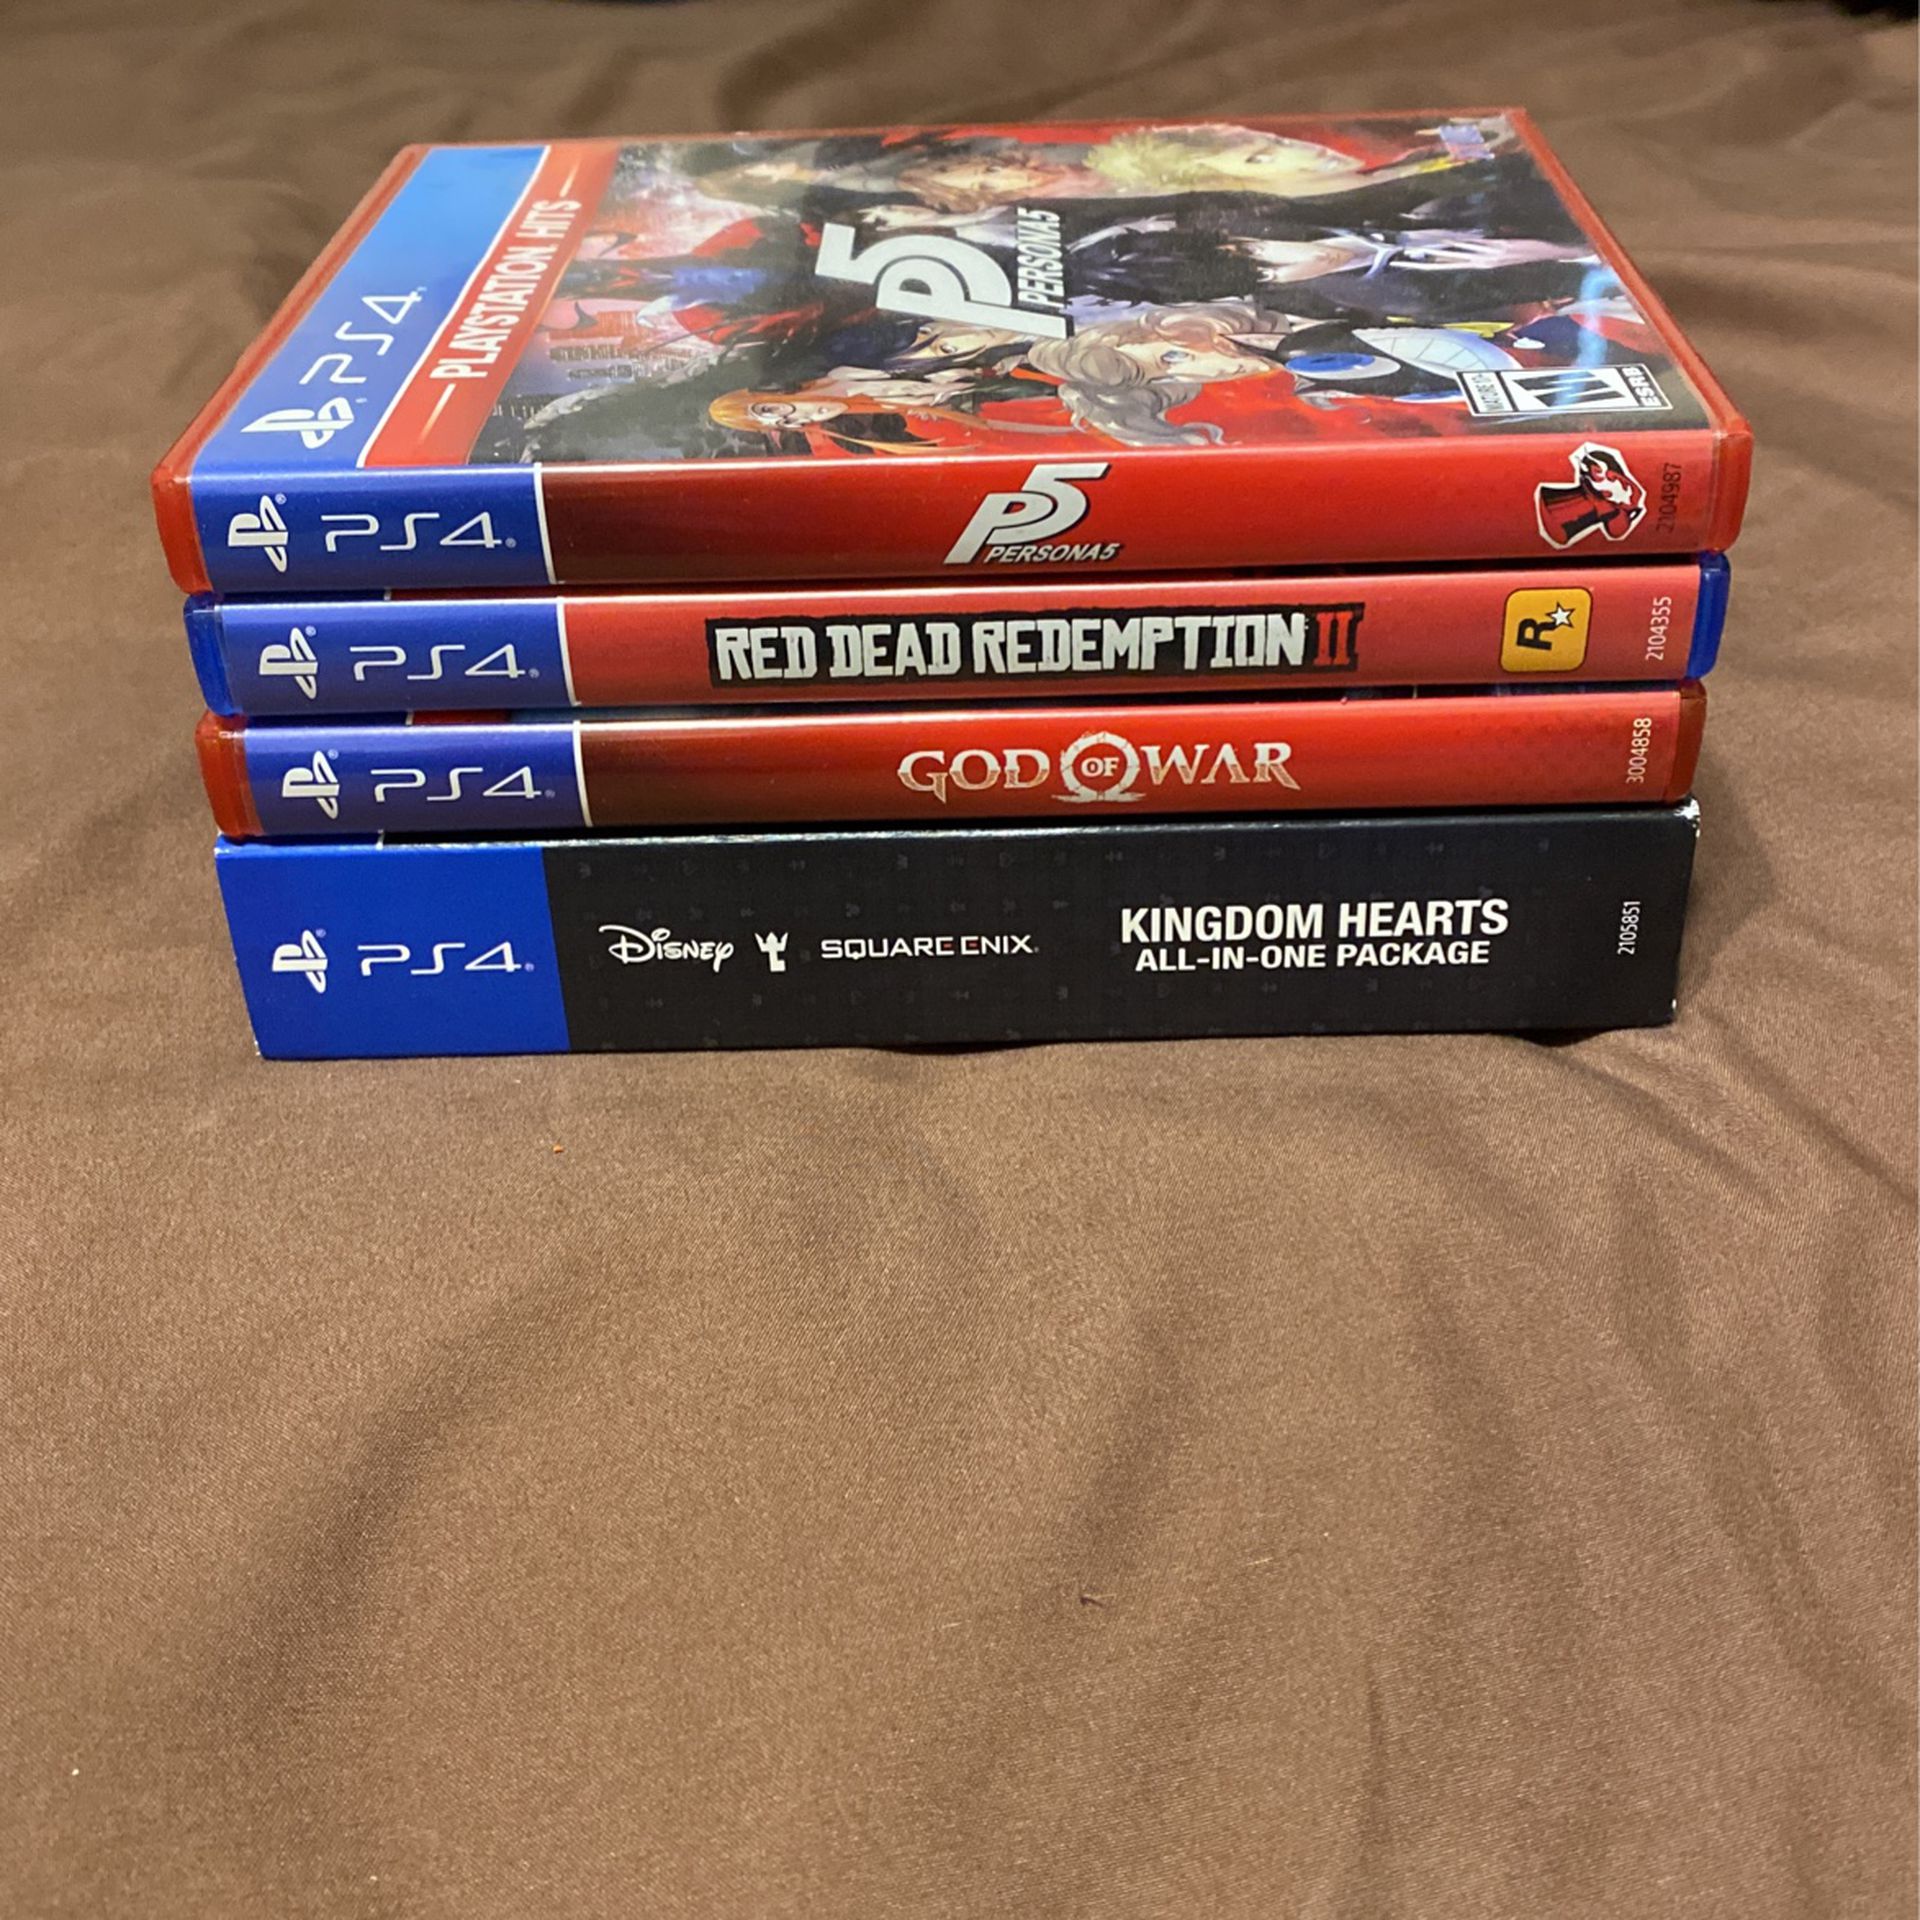 PS4 Games (Persona 5, Kingdom Hearts, God of War, Red Dead Redemption 2)